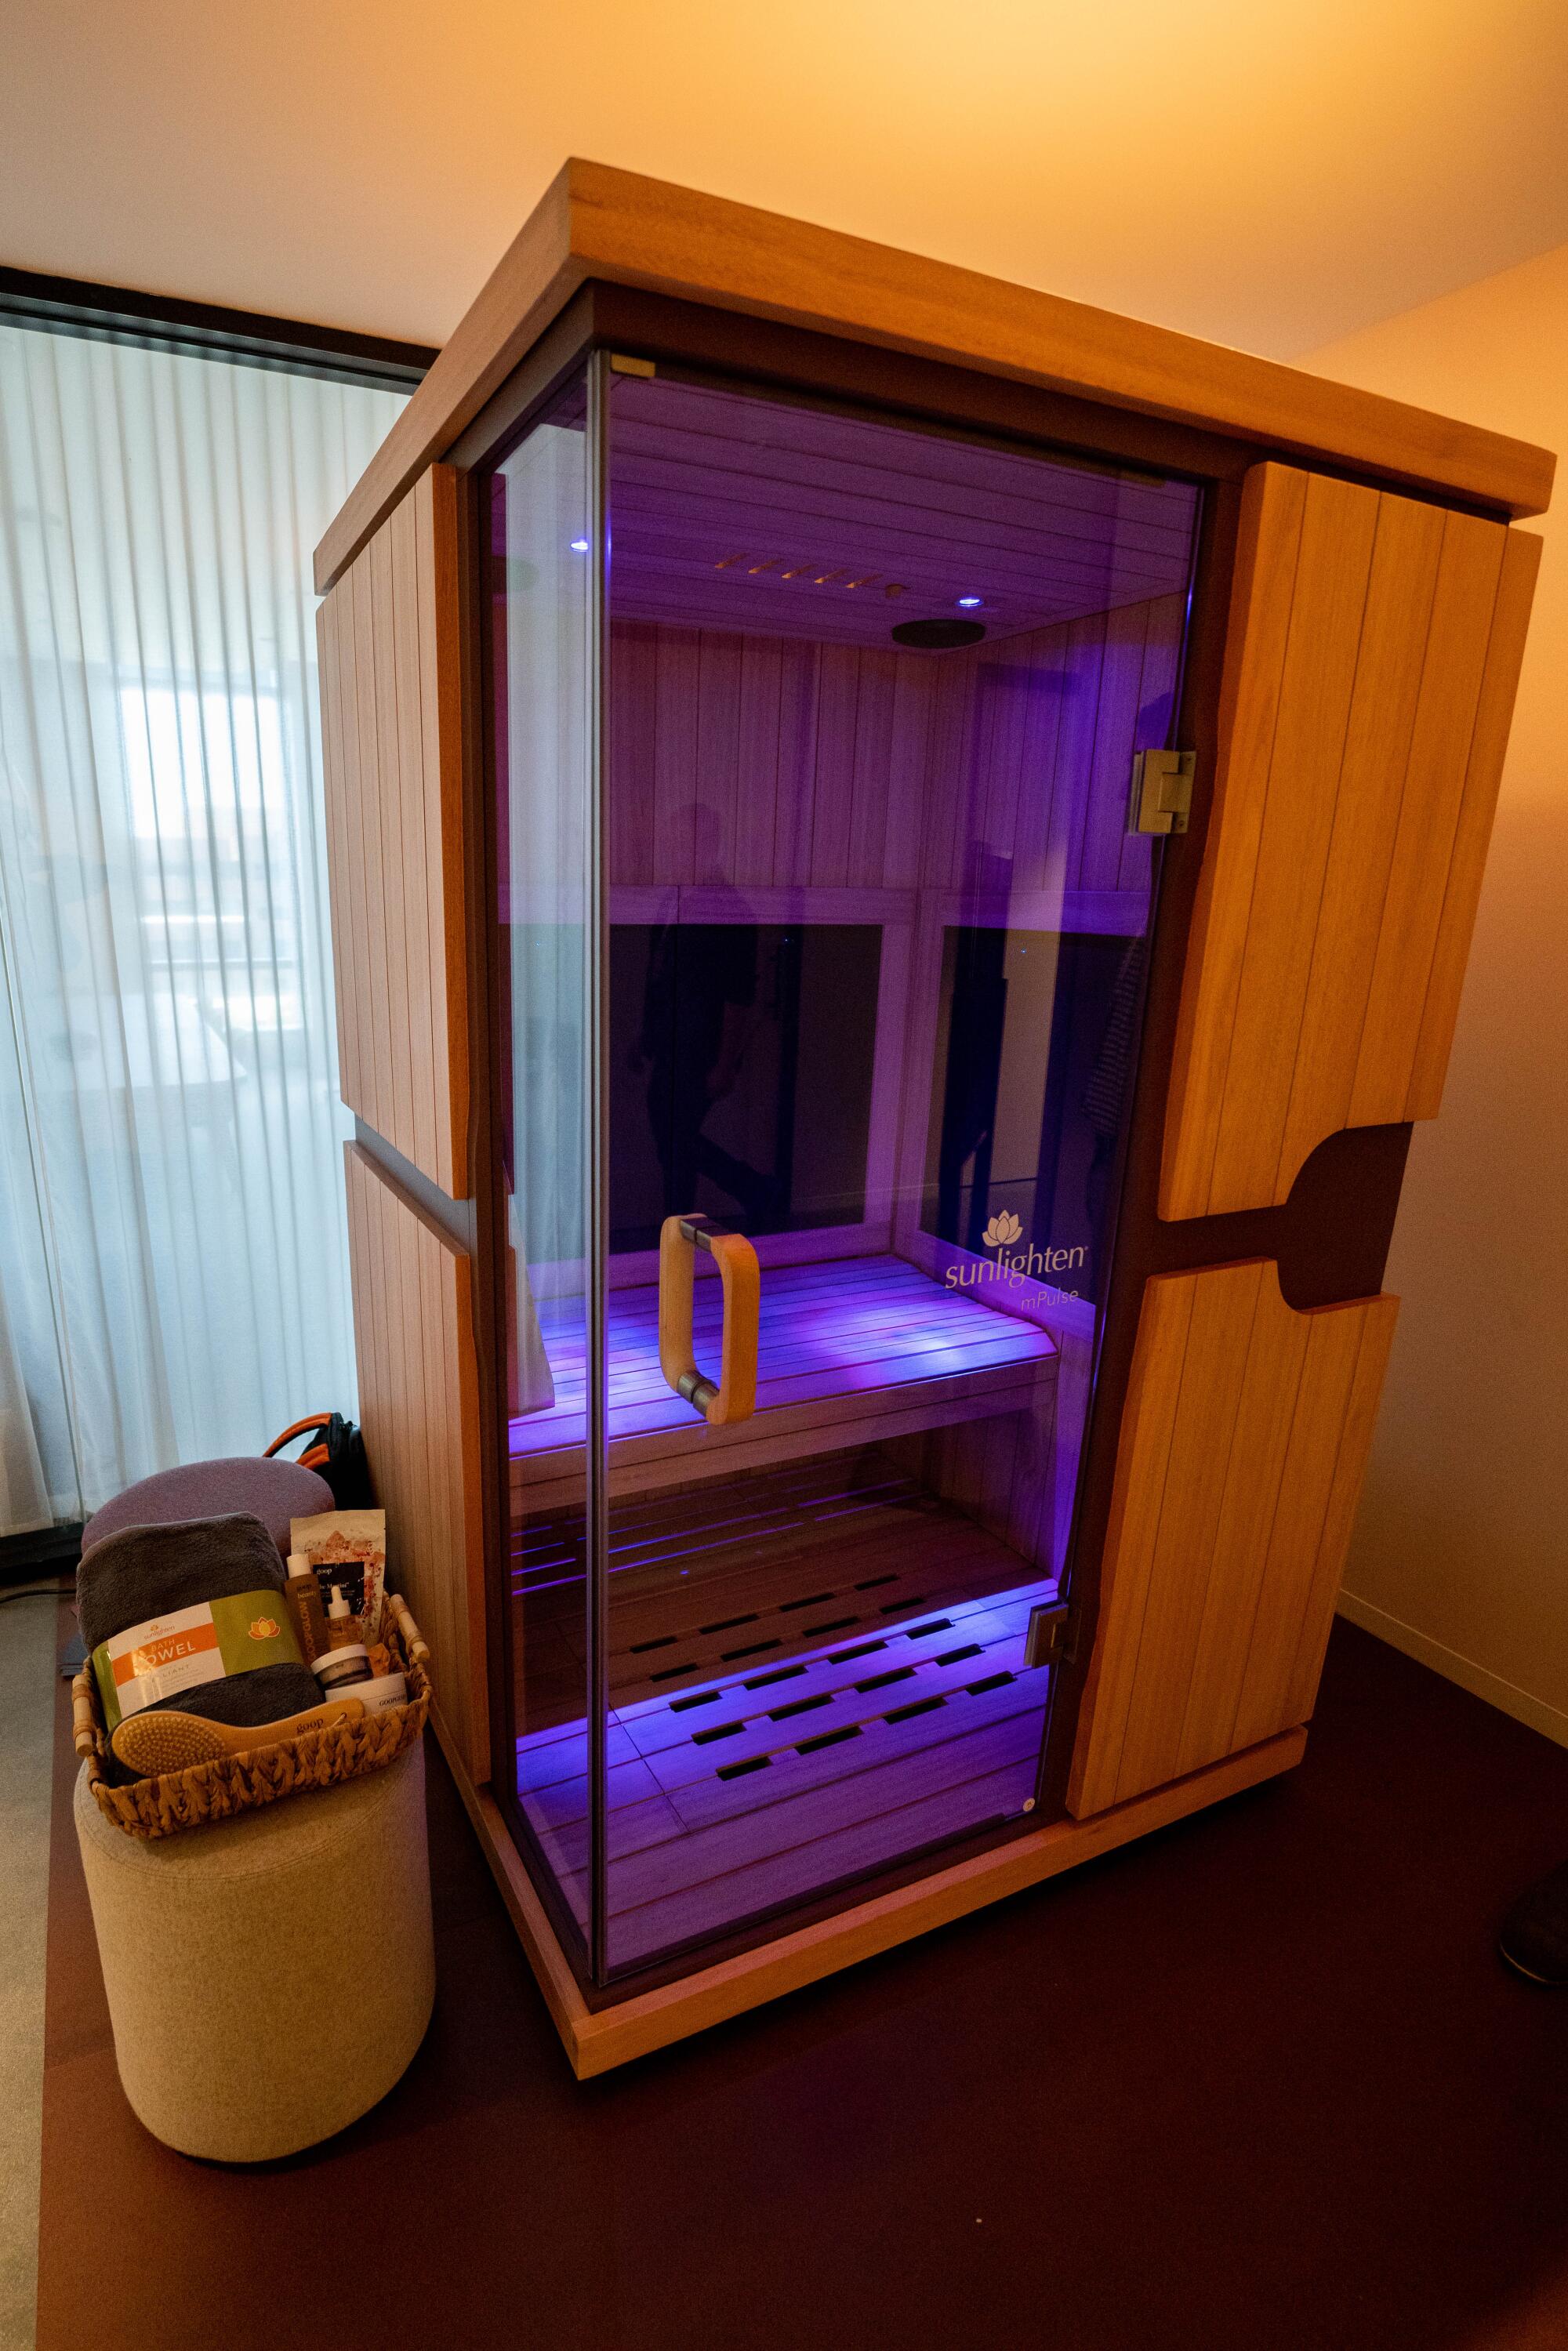 An infrared sauna at the Goop event in Santa Monica.